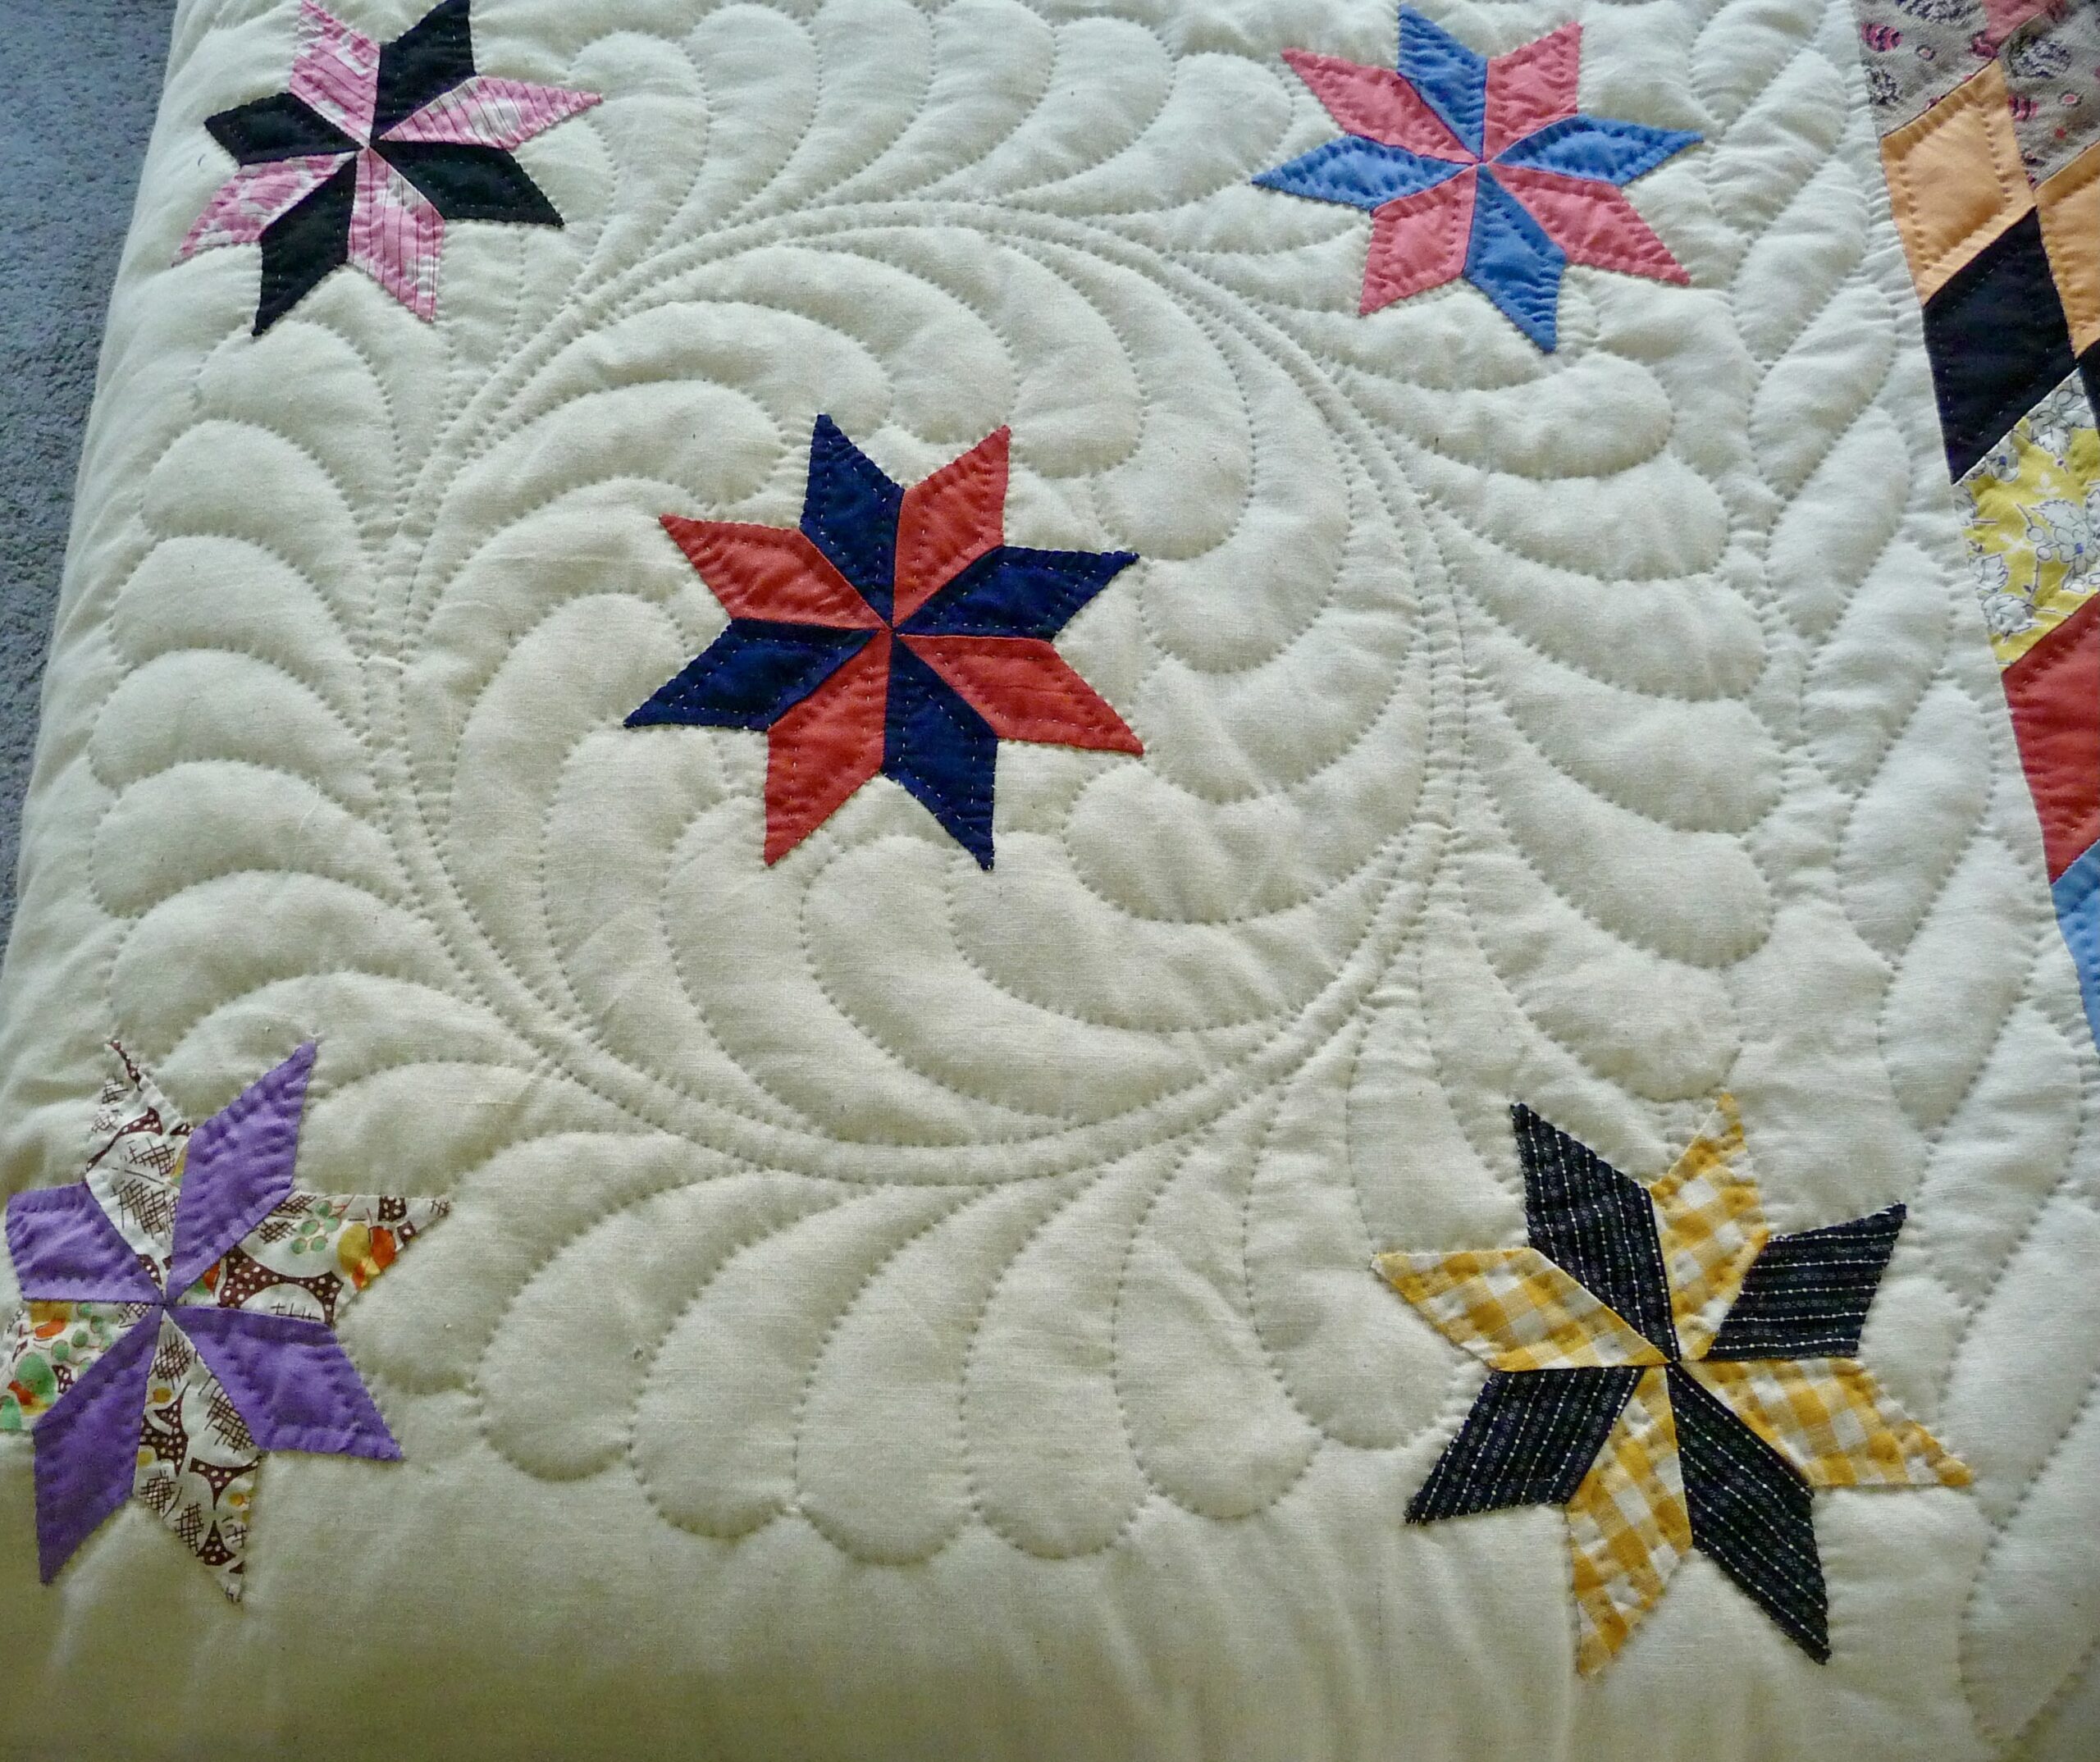 Amish Quilt for Sale Lone Star